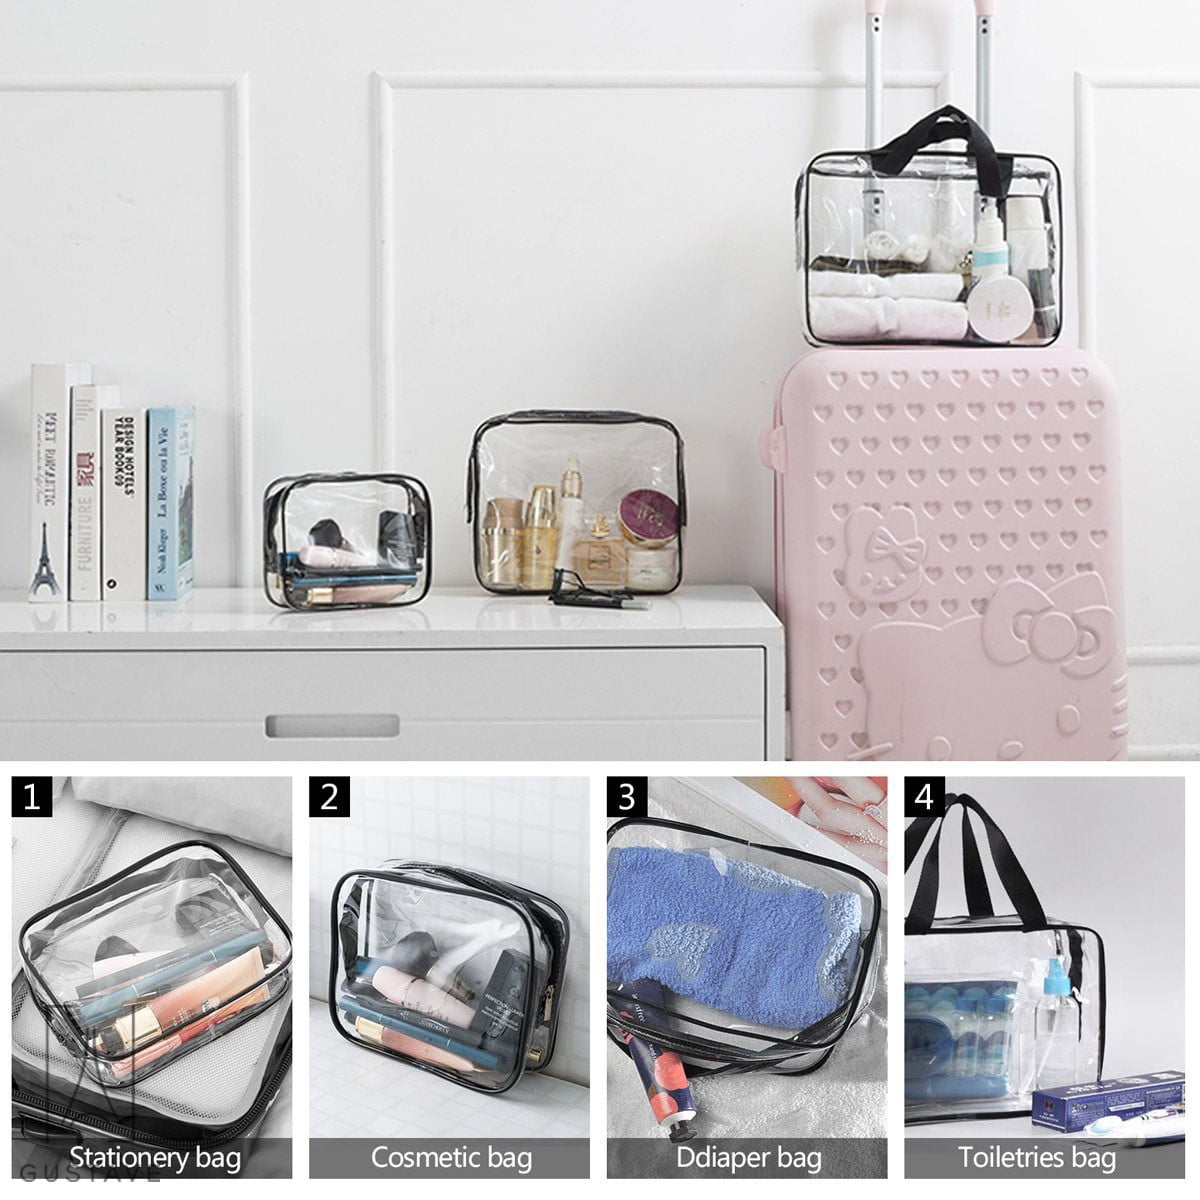 Luxtrada Clear Cosmetic Makeup Zipper Bag PVC Vinyl Plastic Toiletry for Travel Accessories Organizer, 3 Piece Set, Size: Small;Medium;Large